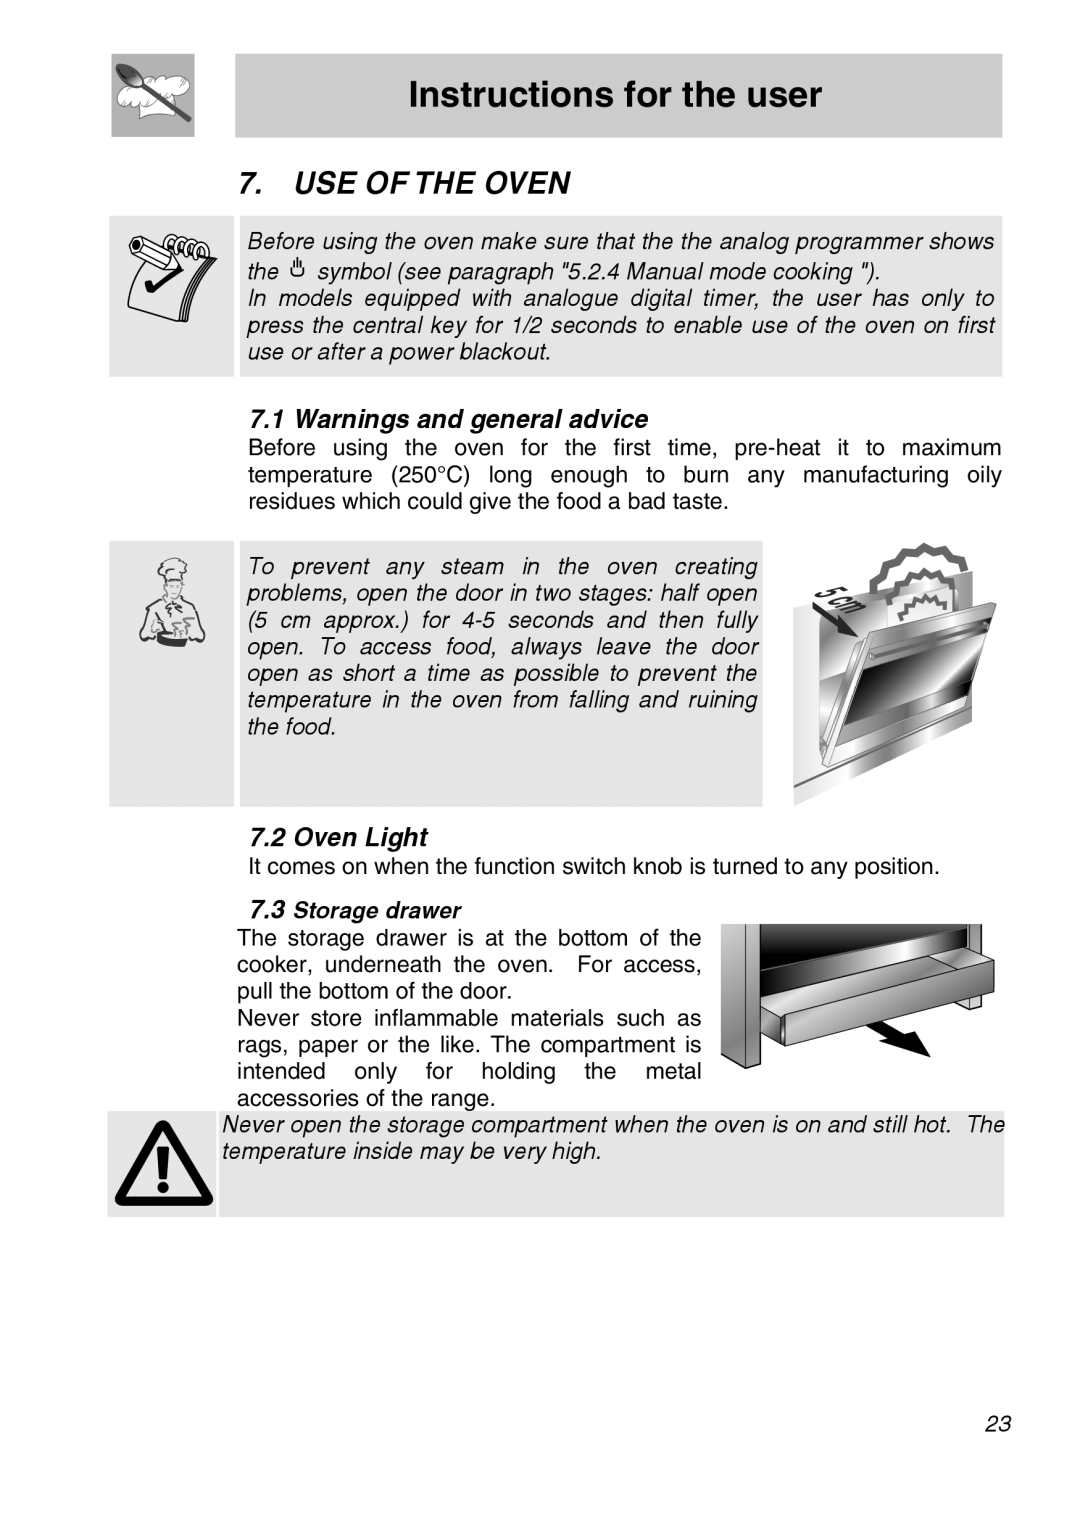 Smeg A11A-6 manual Use Of The Oven, Instructions for the user, Warnings and general advice, Oven Light 